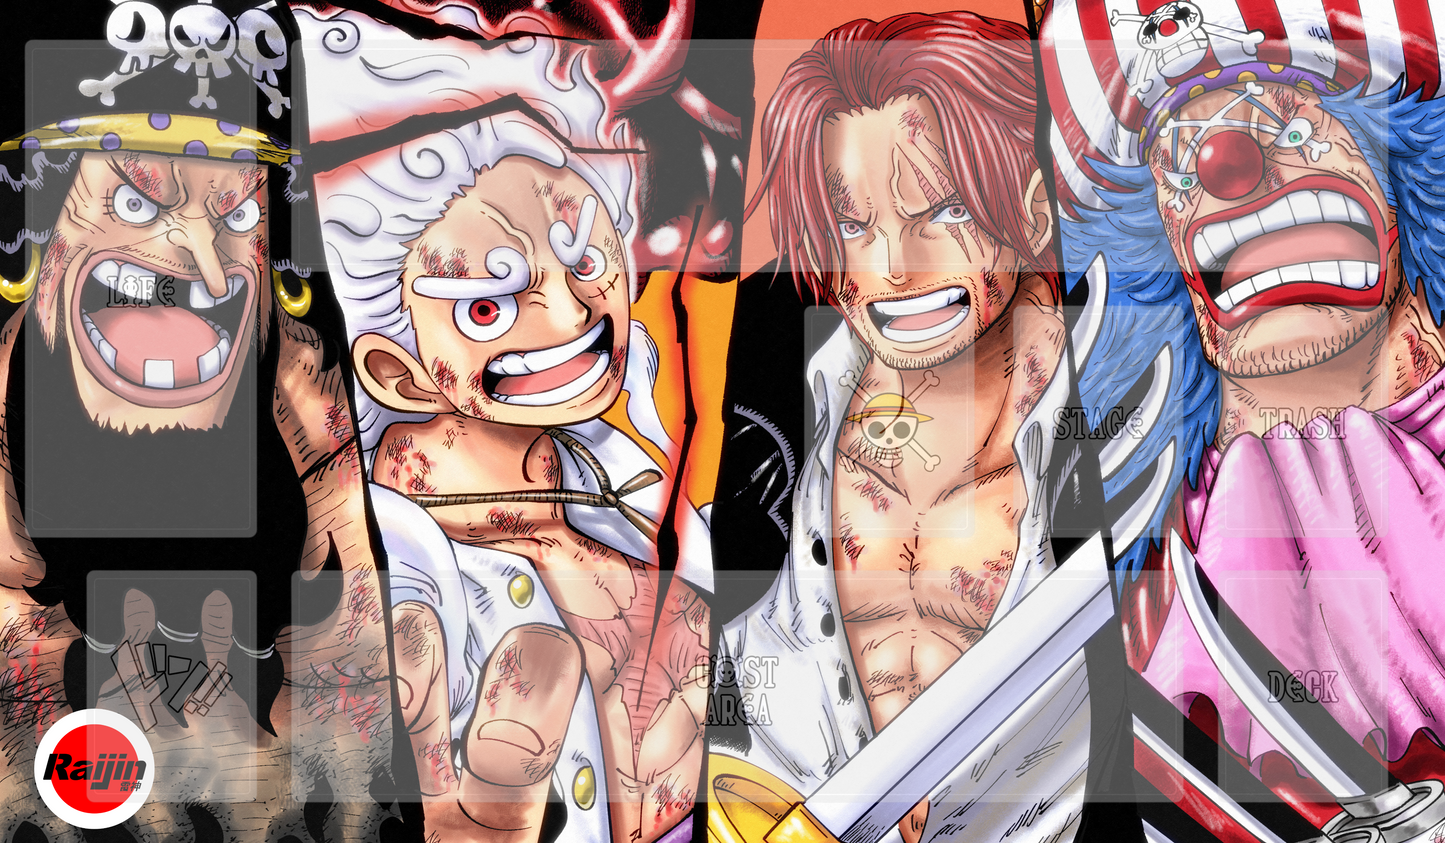 Playmat One Piece - Four Emperors #2